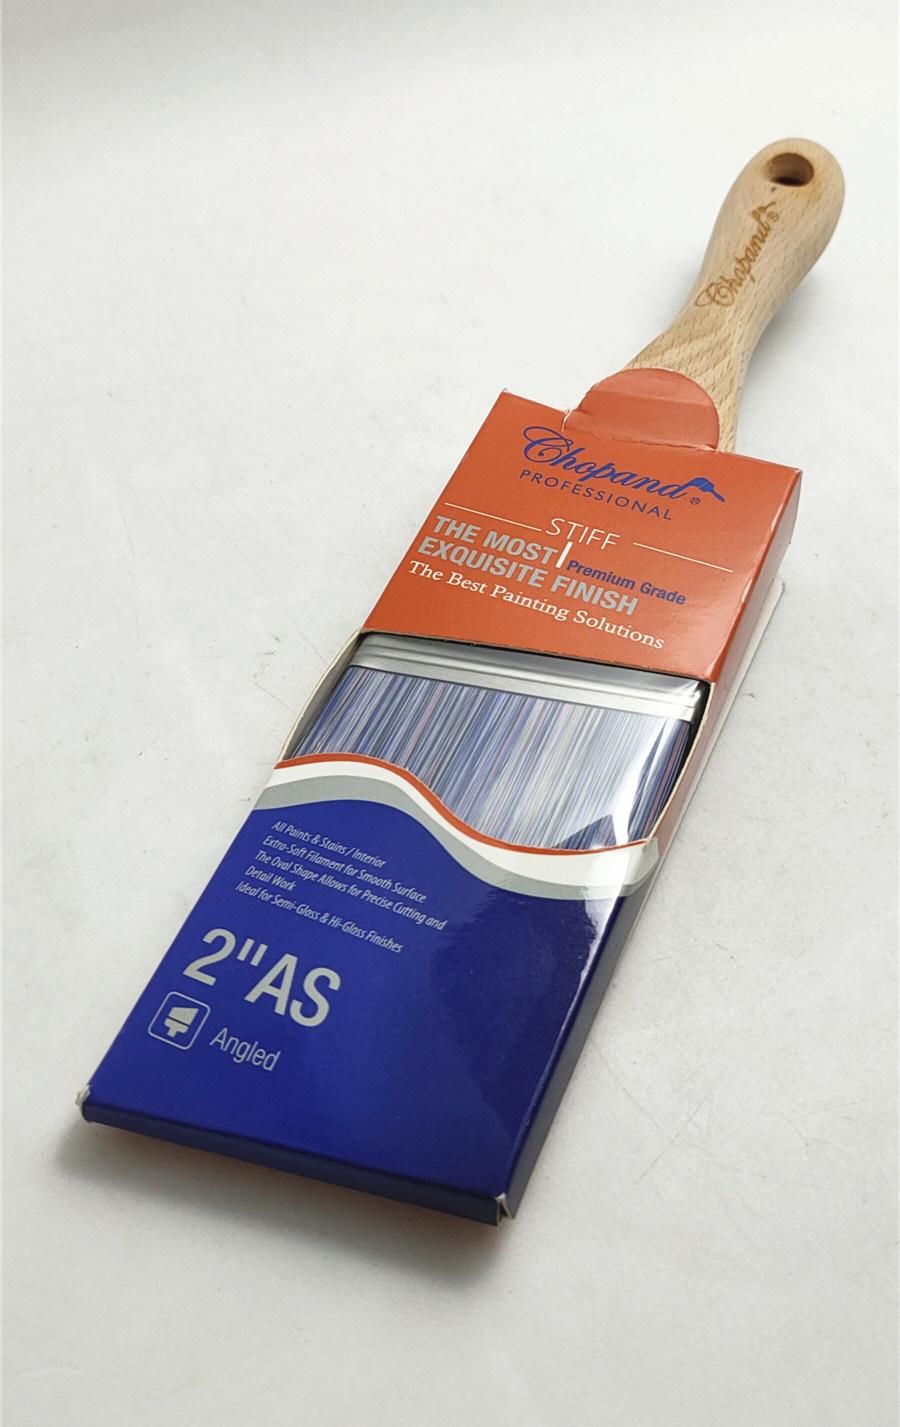 Factory Price High Quality Wooden Handle Paint Brush